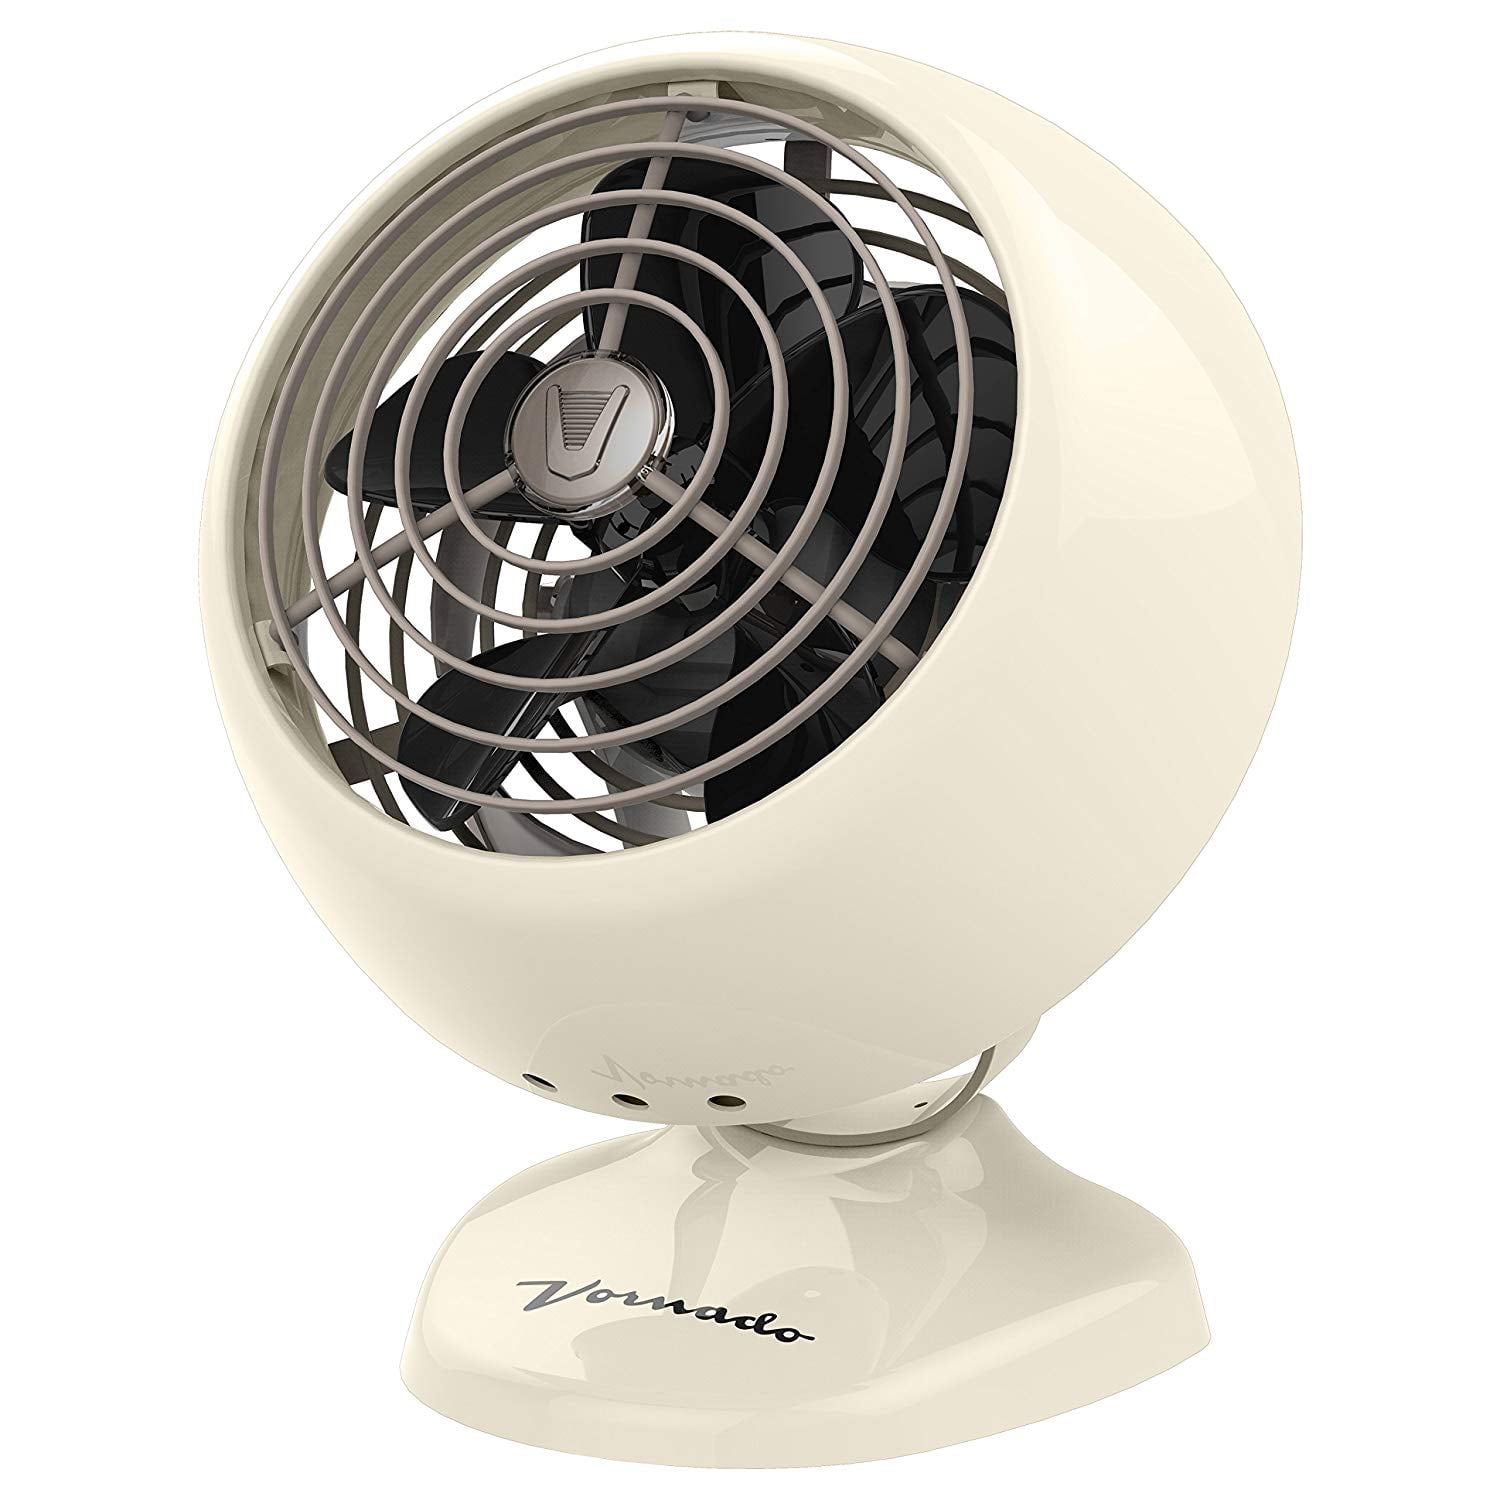 Vornado Vfan Mini Classic Personal Vintage Air Circulator Fan 7 Bestselling Fans Amazon Customers Always Buy When Its Too Hot To Function Popsugar Smart Living Photo 7